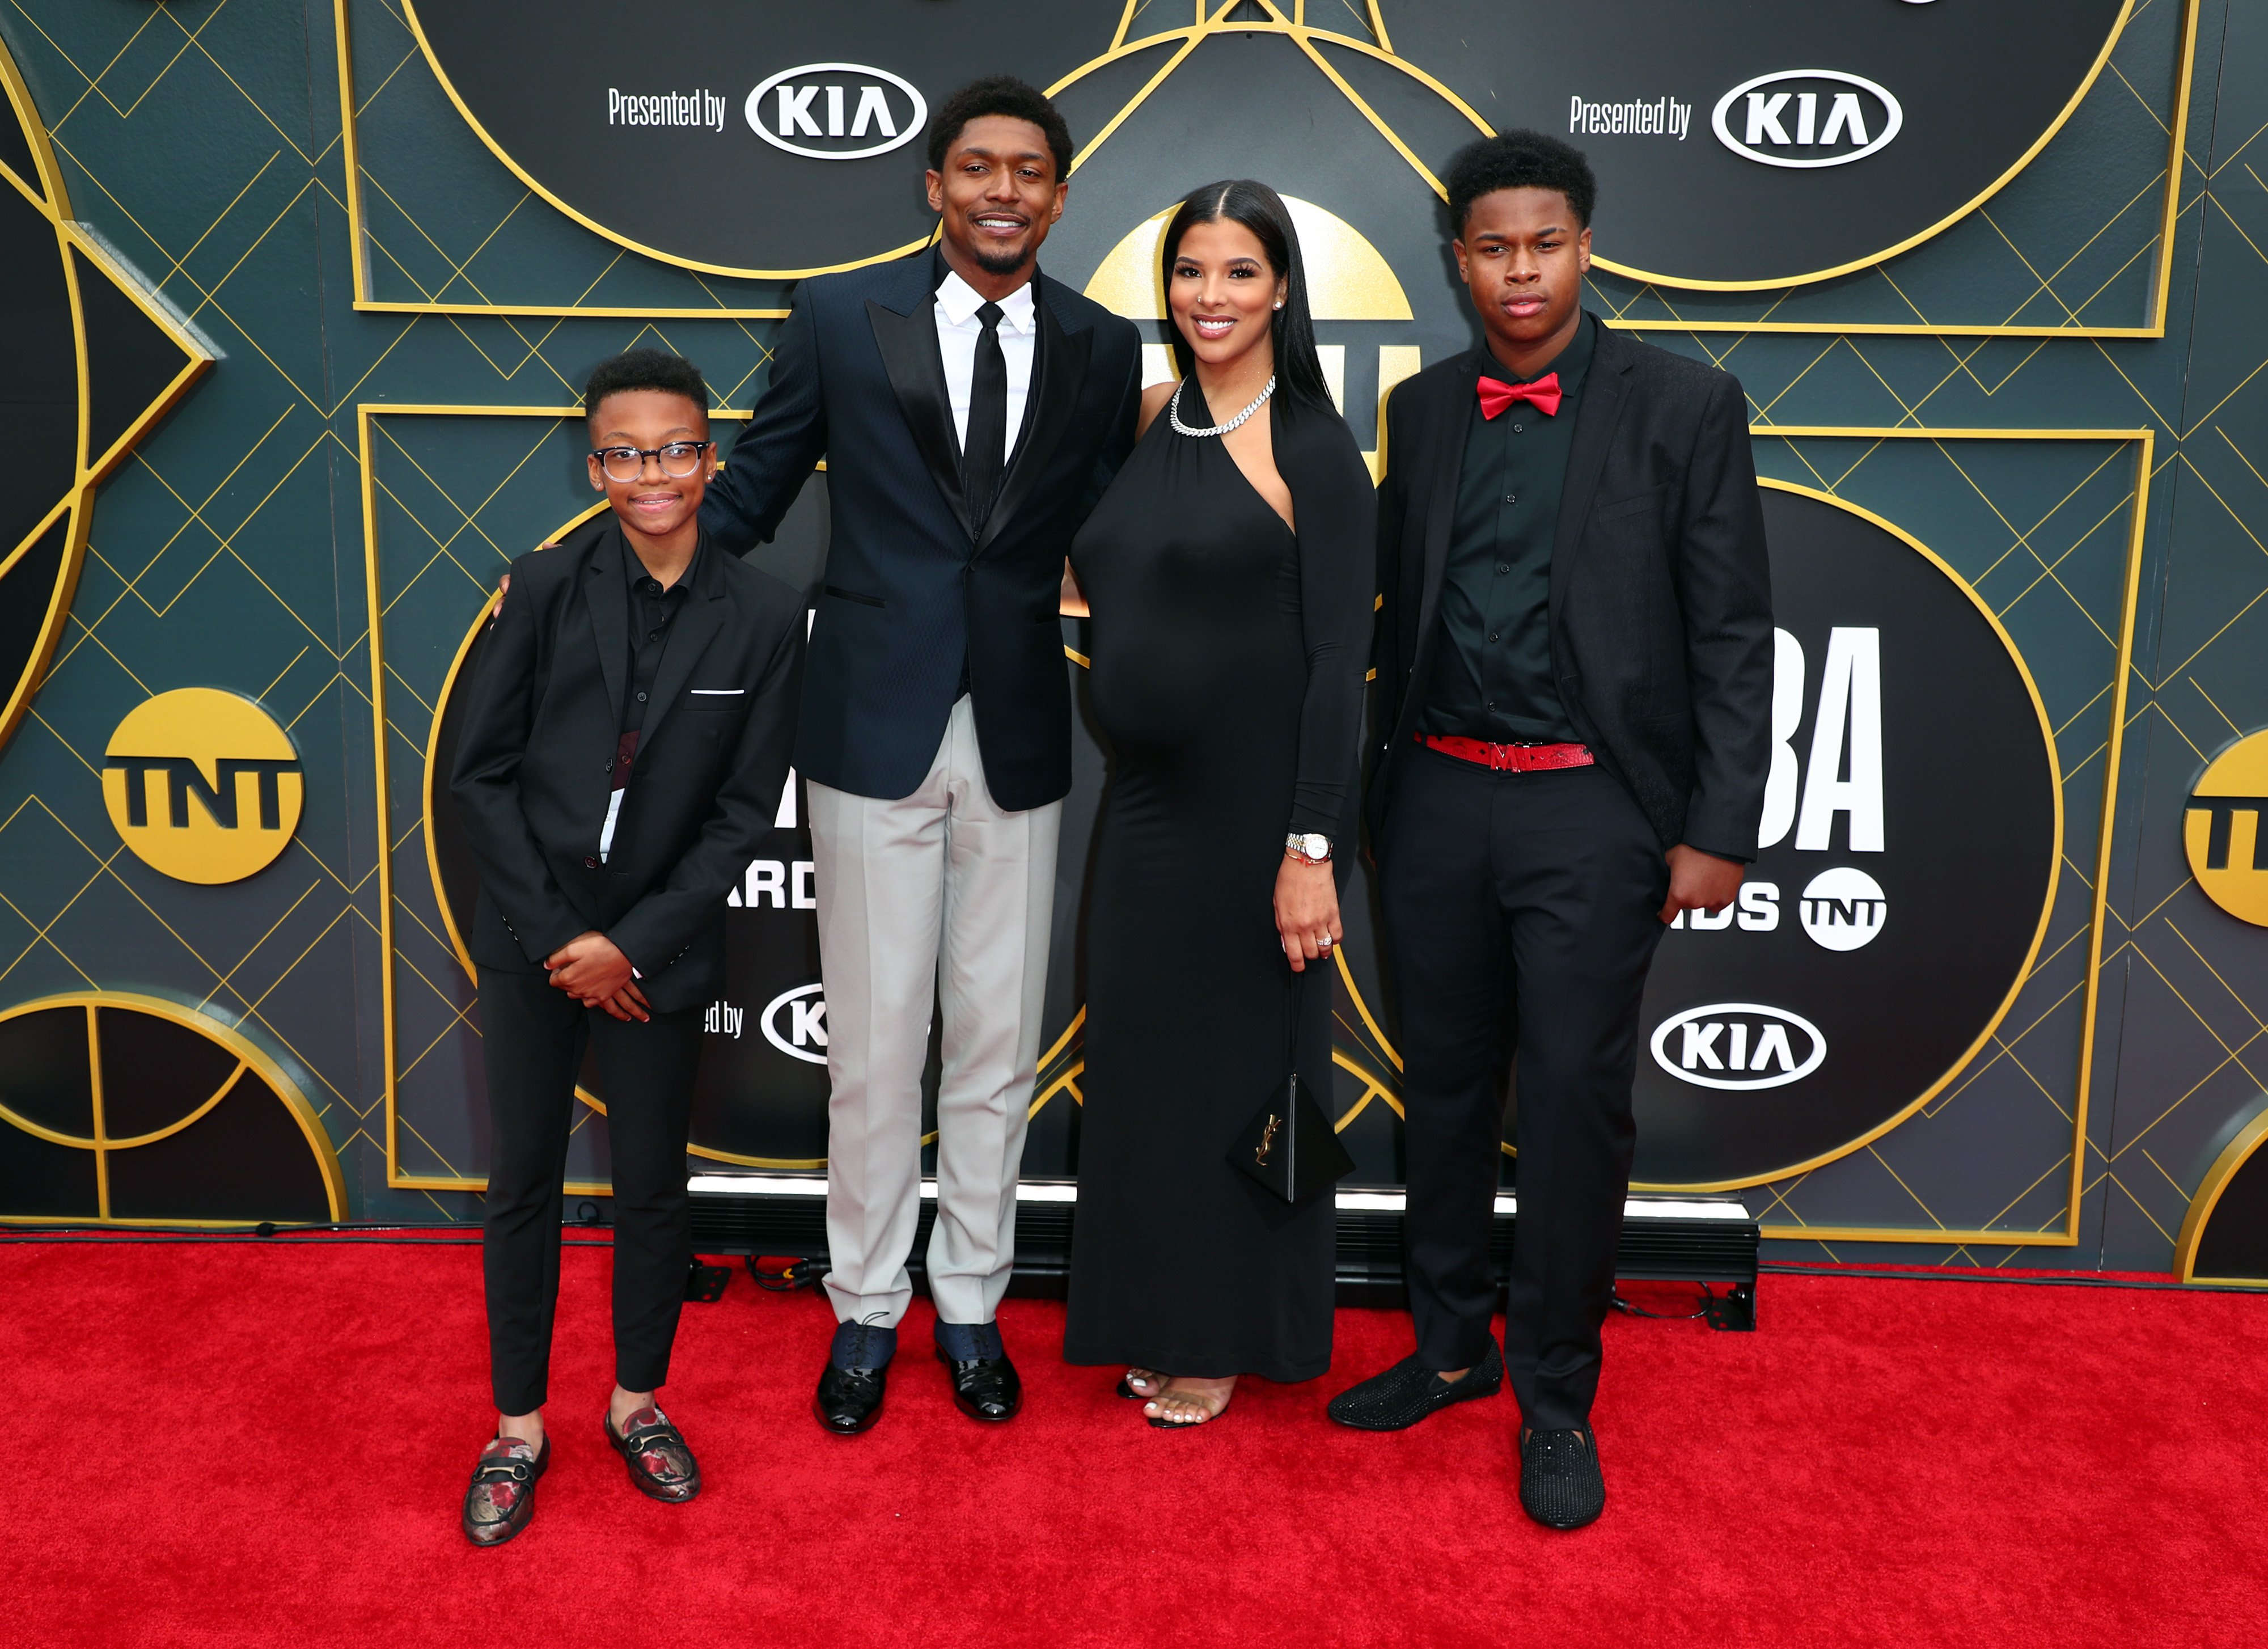  Bradley Beal and his family at the 2019 NBA Awards in Santa Monica, California. | Source: Getty Images